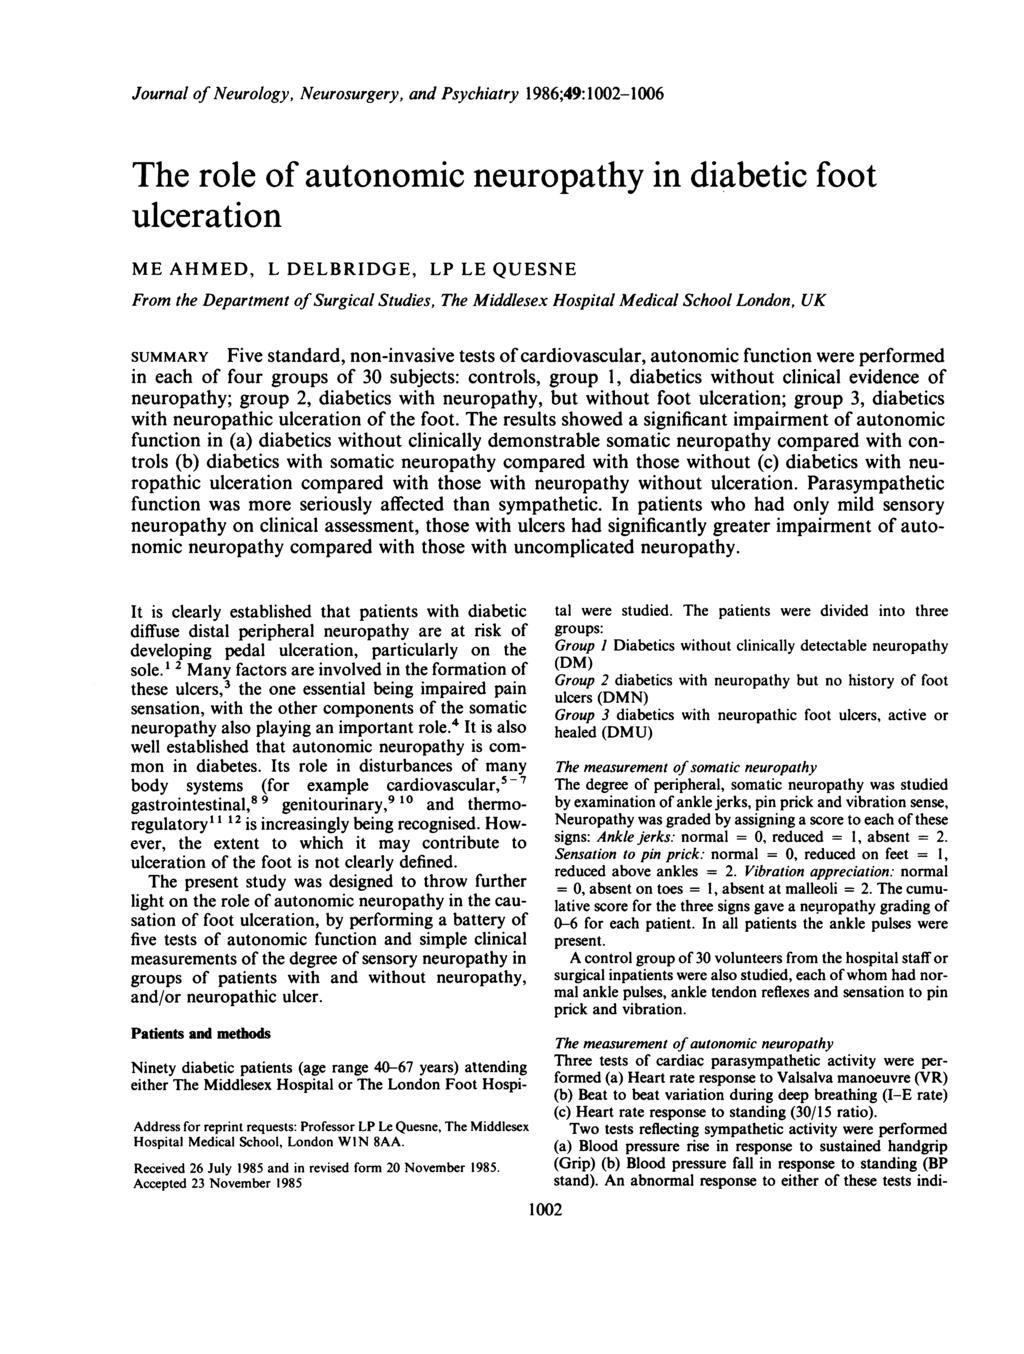 Journal of Neurology, Neurosurgery, and Psychiatry 1986;49:1216 The role of autonomic neuropathy in diabetic foot ulceration ME AHMED, L DELBRIDGE, LP LE QUESNE From the Department ofsurgical